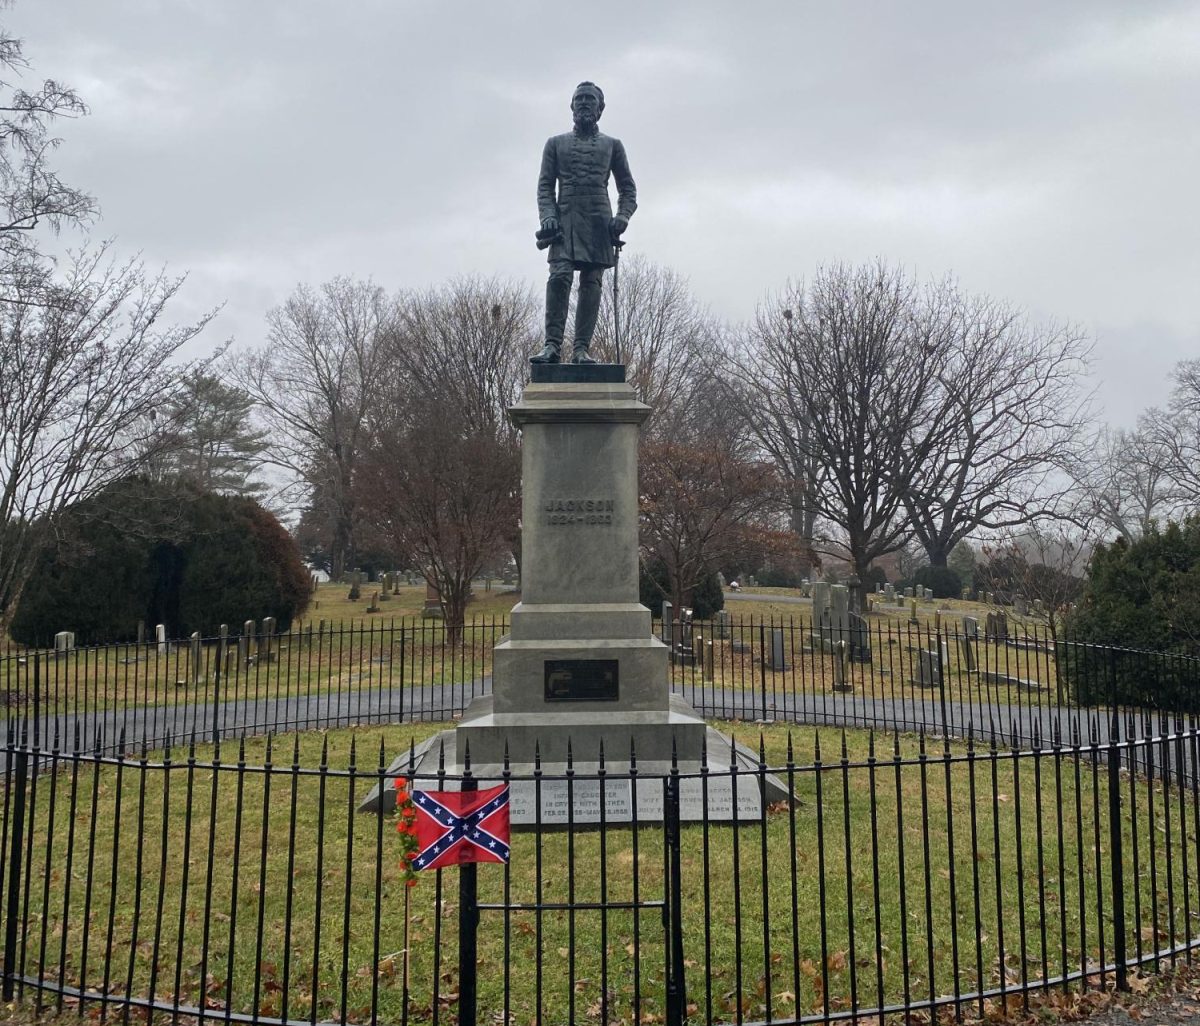 Lexington+City+Council+members+voted+unanimously+to+change+the+name+of+Stonewall+Jackson+Memorial+Cemetery+after+Alexander%E2%80%99s+speech.+Photo+by+Catherine+McKean%2C+%E2%80%9924